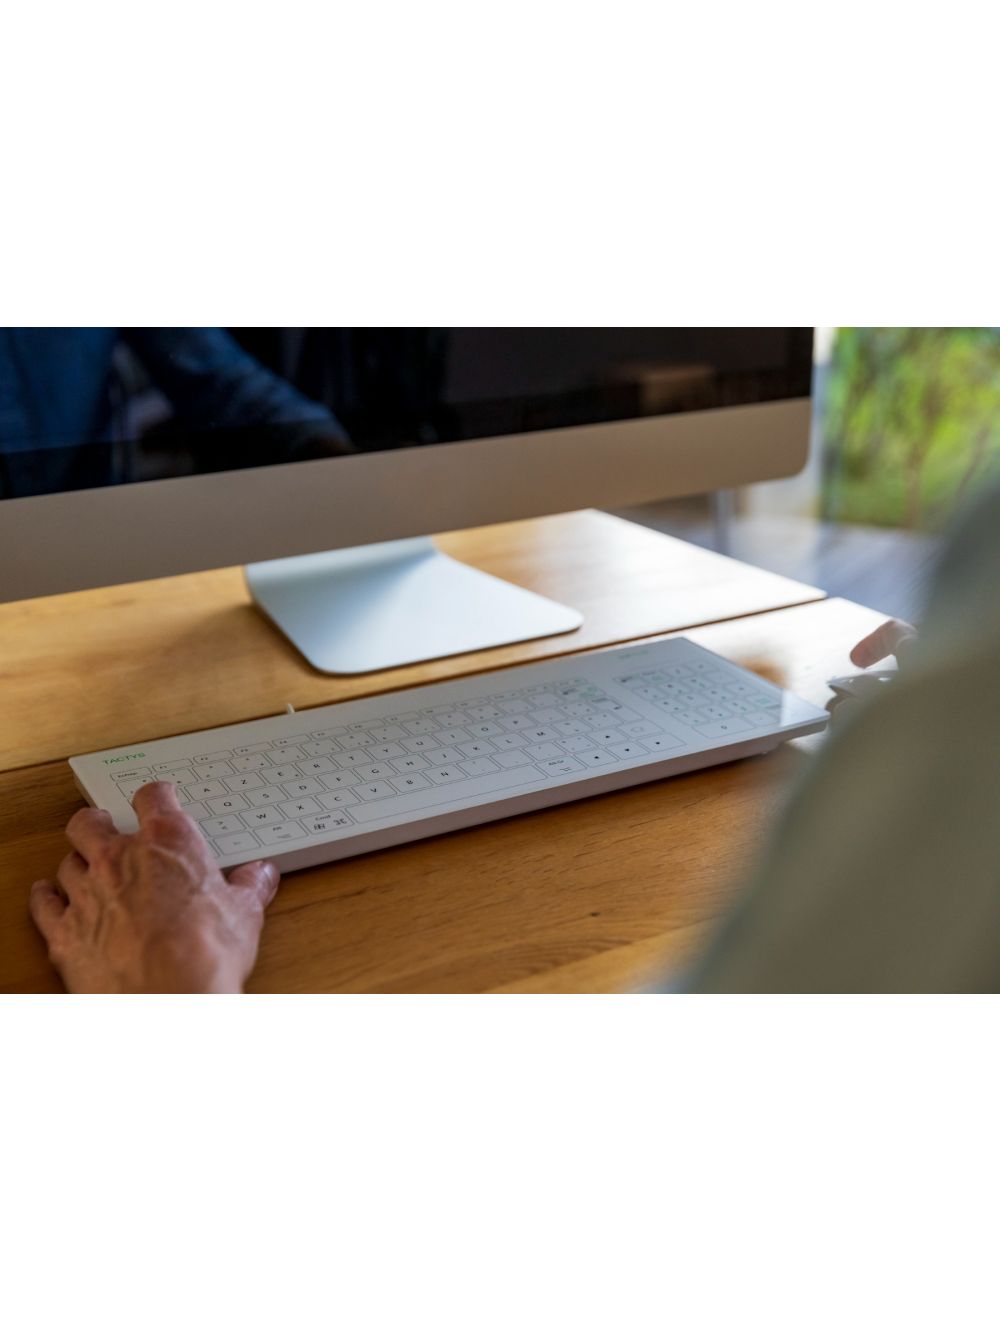 Tactys Glass Touch Sensible Washable Keyboard 